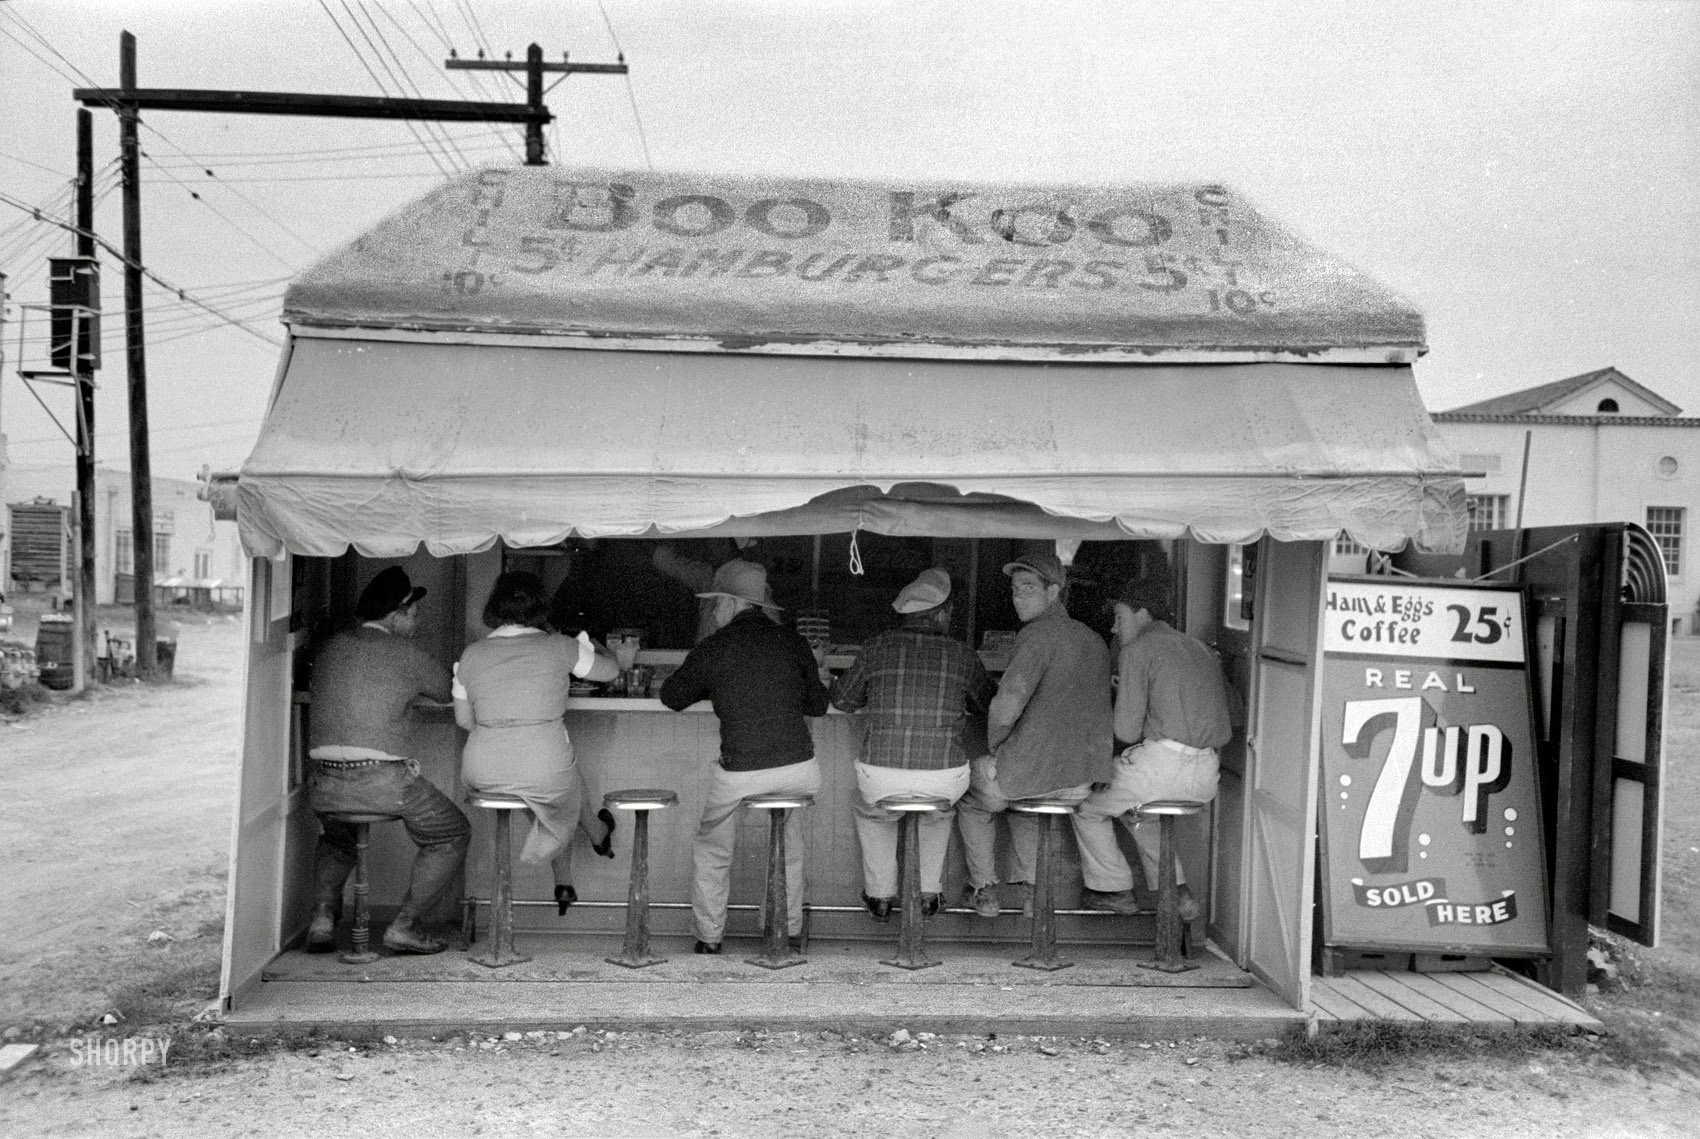 February 1939. "Hamburger stand in Harlingen, Texas." Burgers 5 cents, chili a dime, breakfast two bits, the 7up is real. Photo by Russell Lee. View full size.